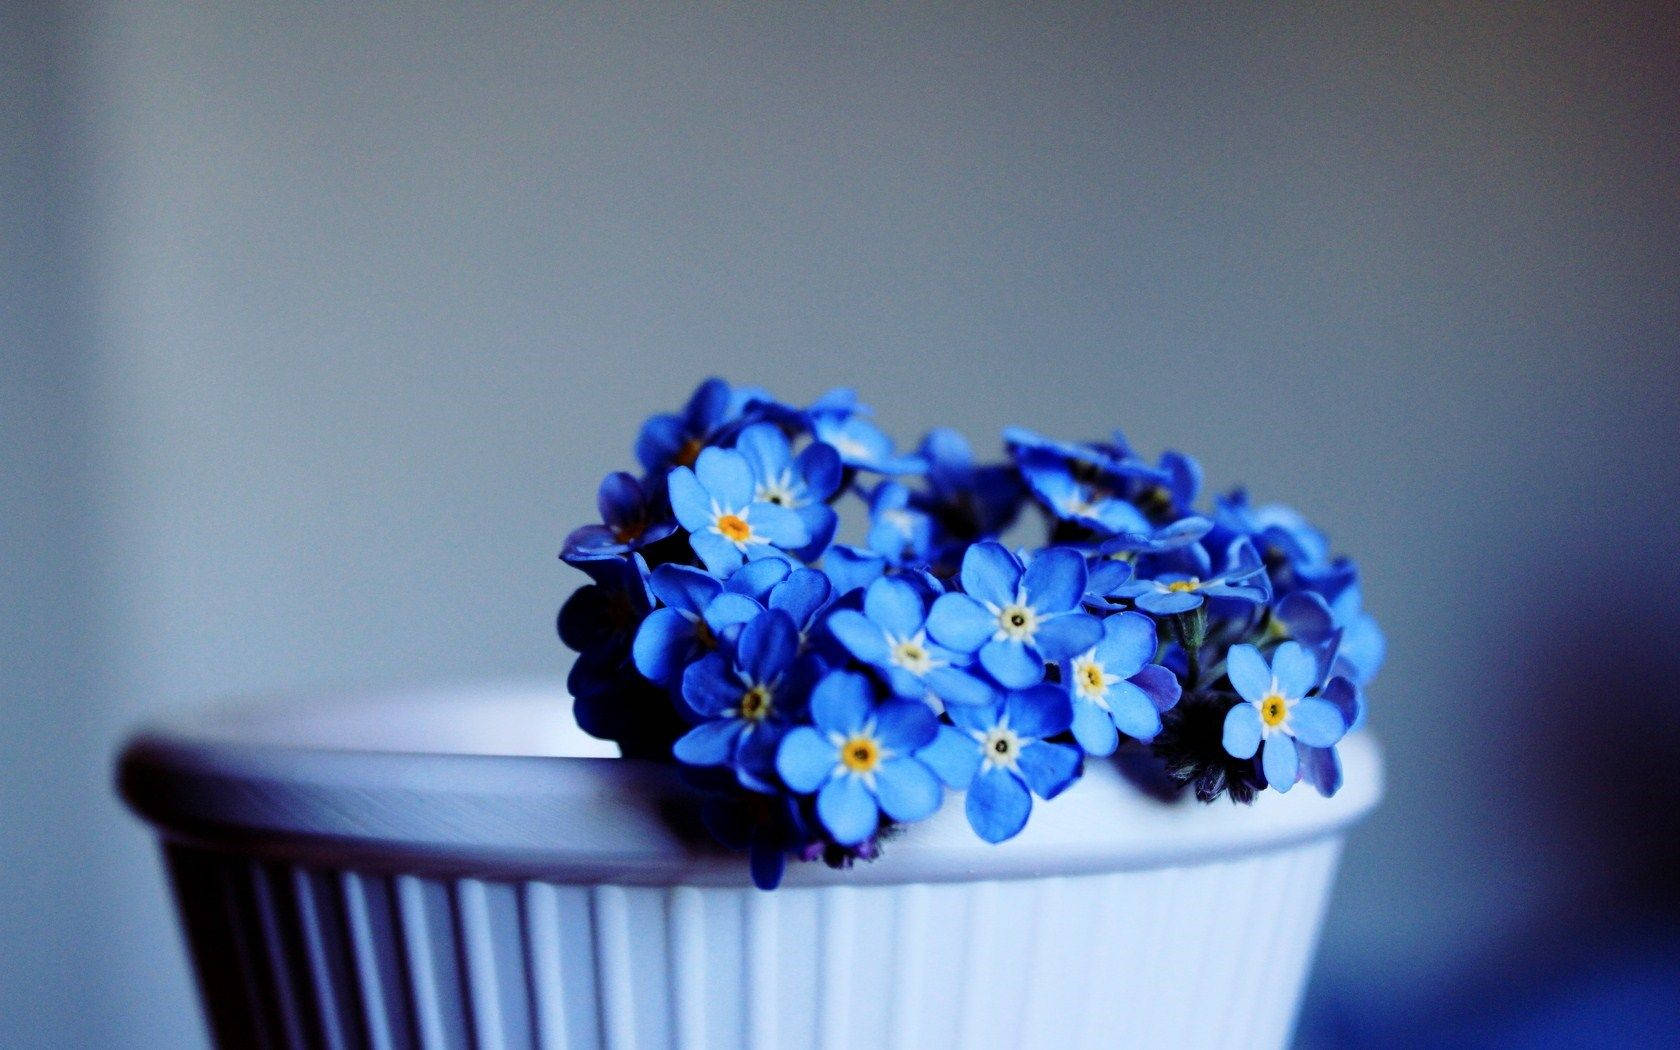 Forget Me Not Flowers In A Vase Wallpaper